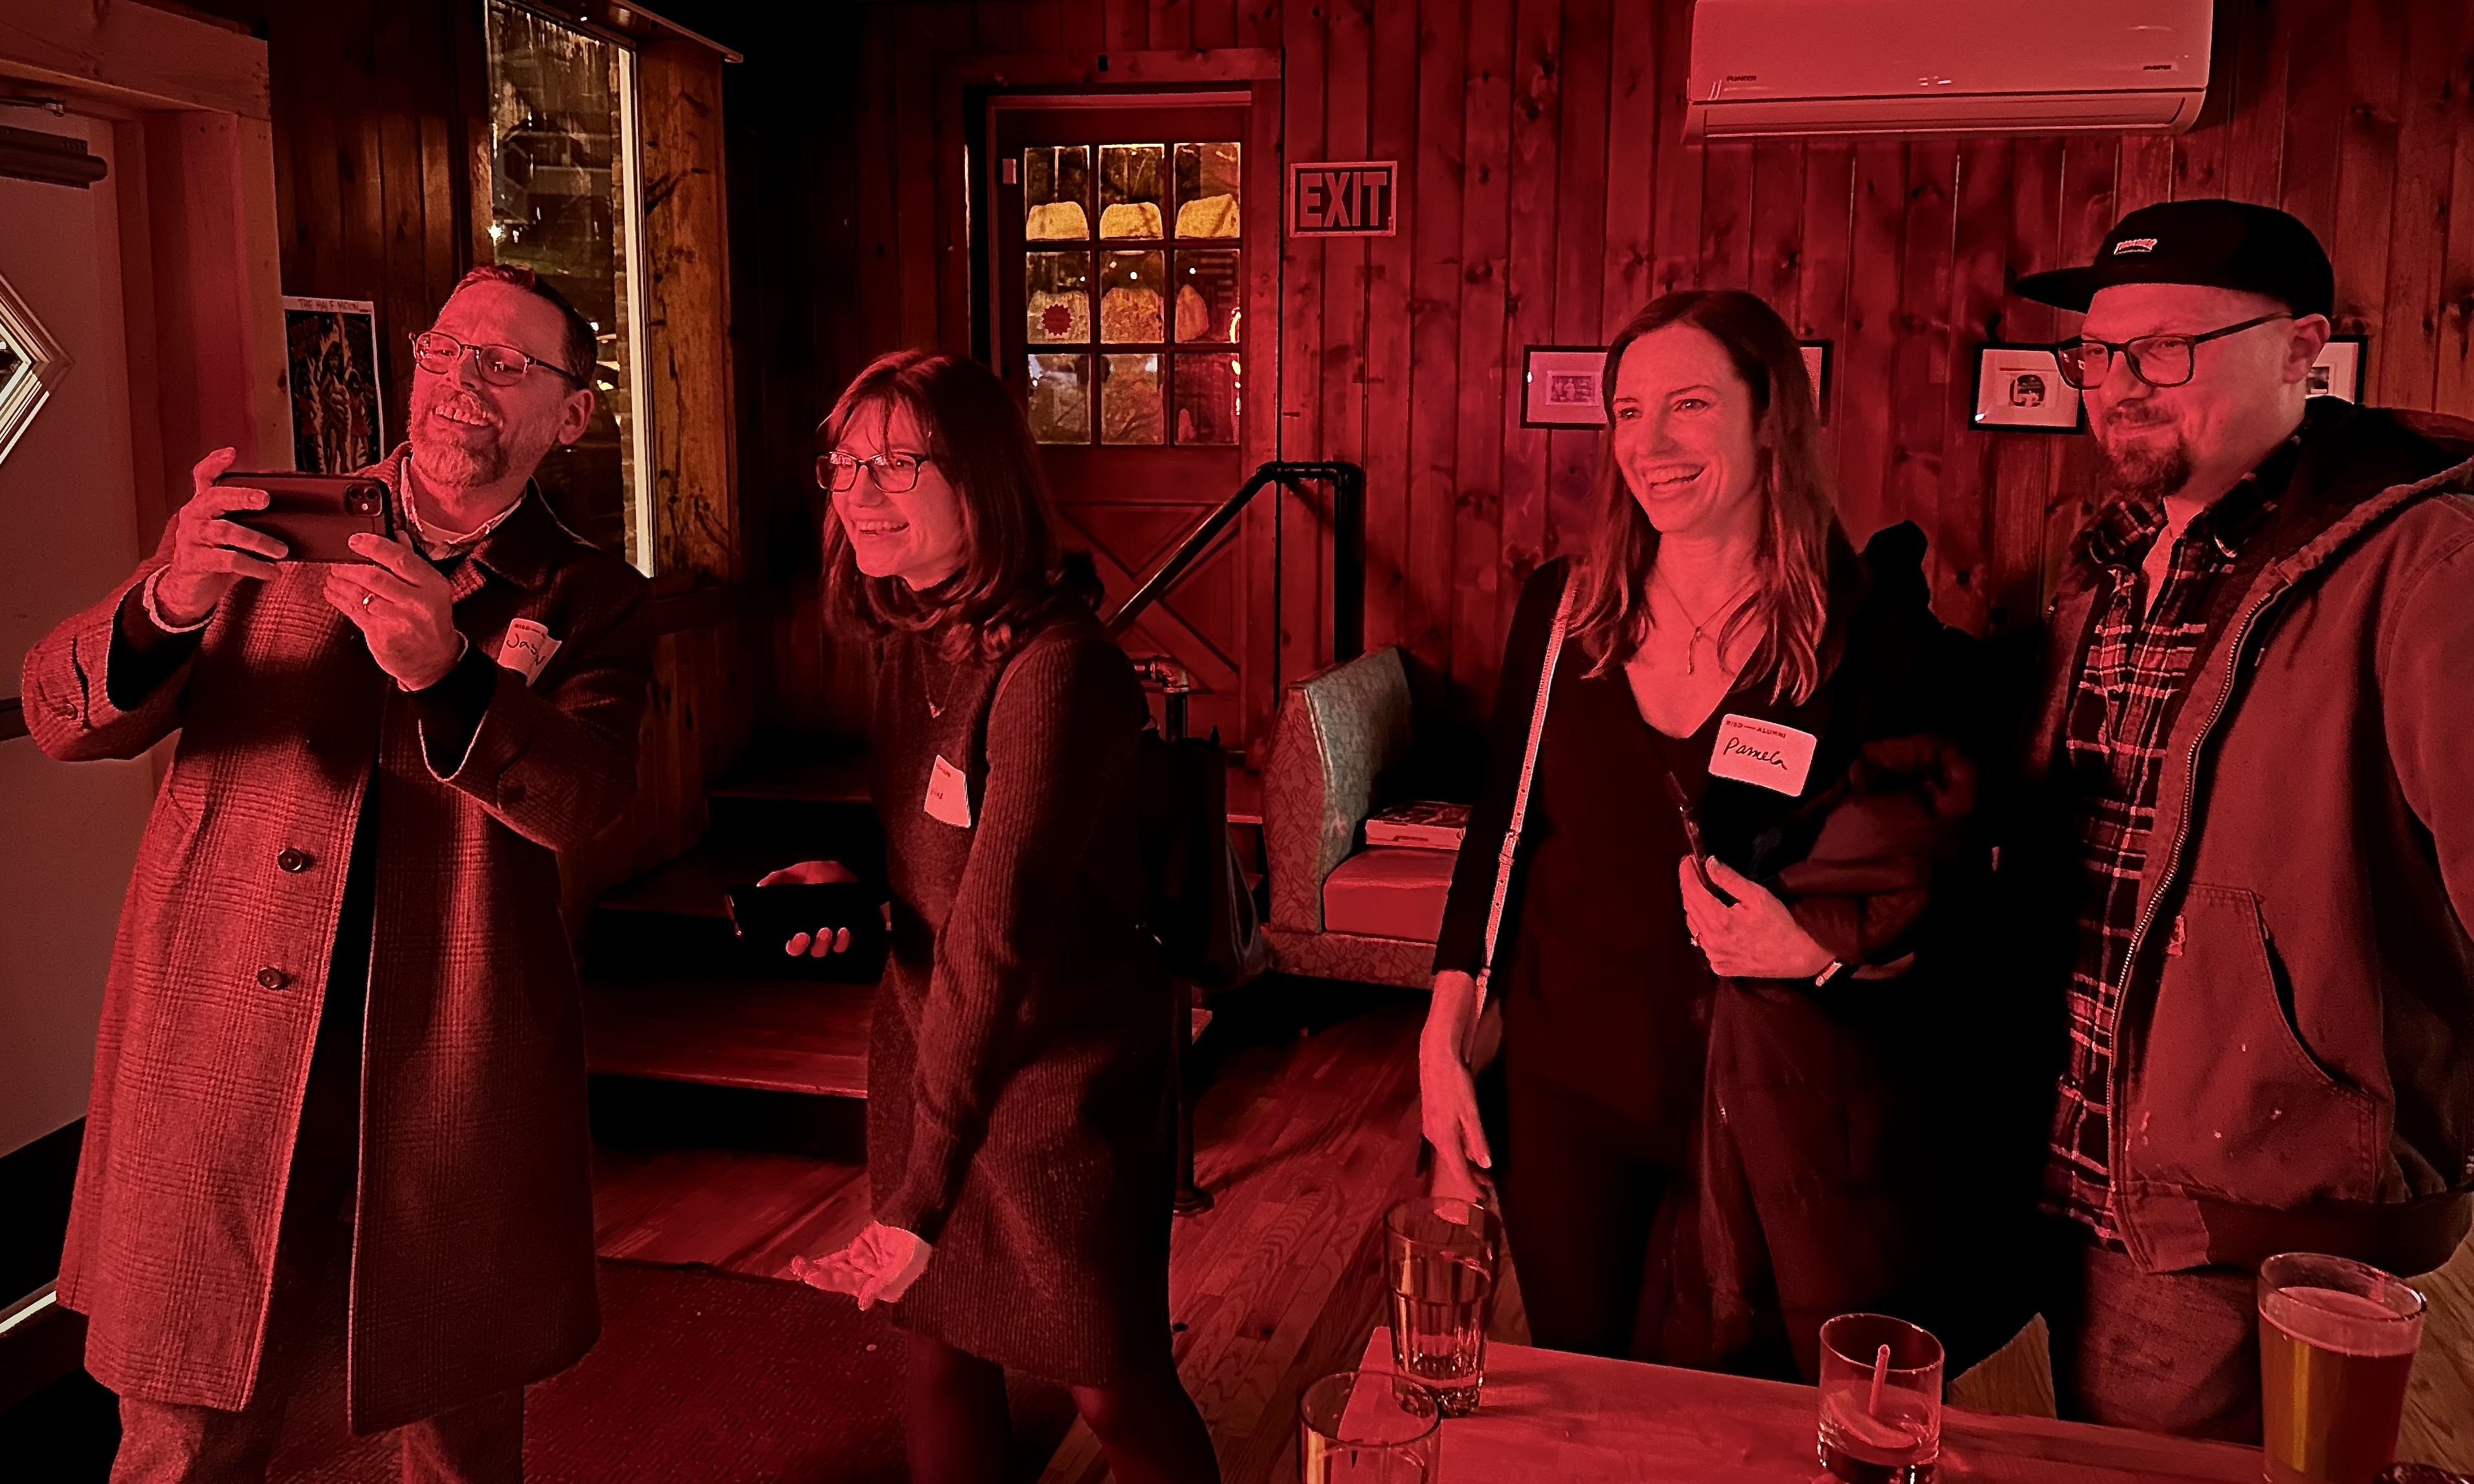 Four people standing in a bar and smiling at something off-camera